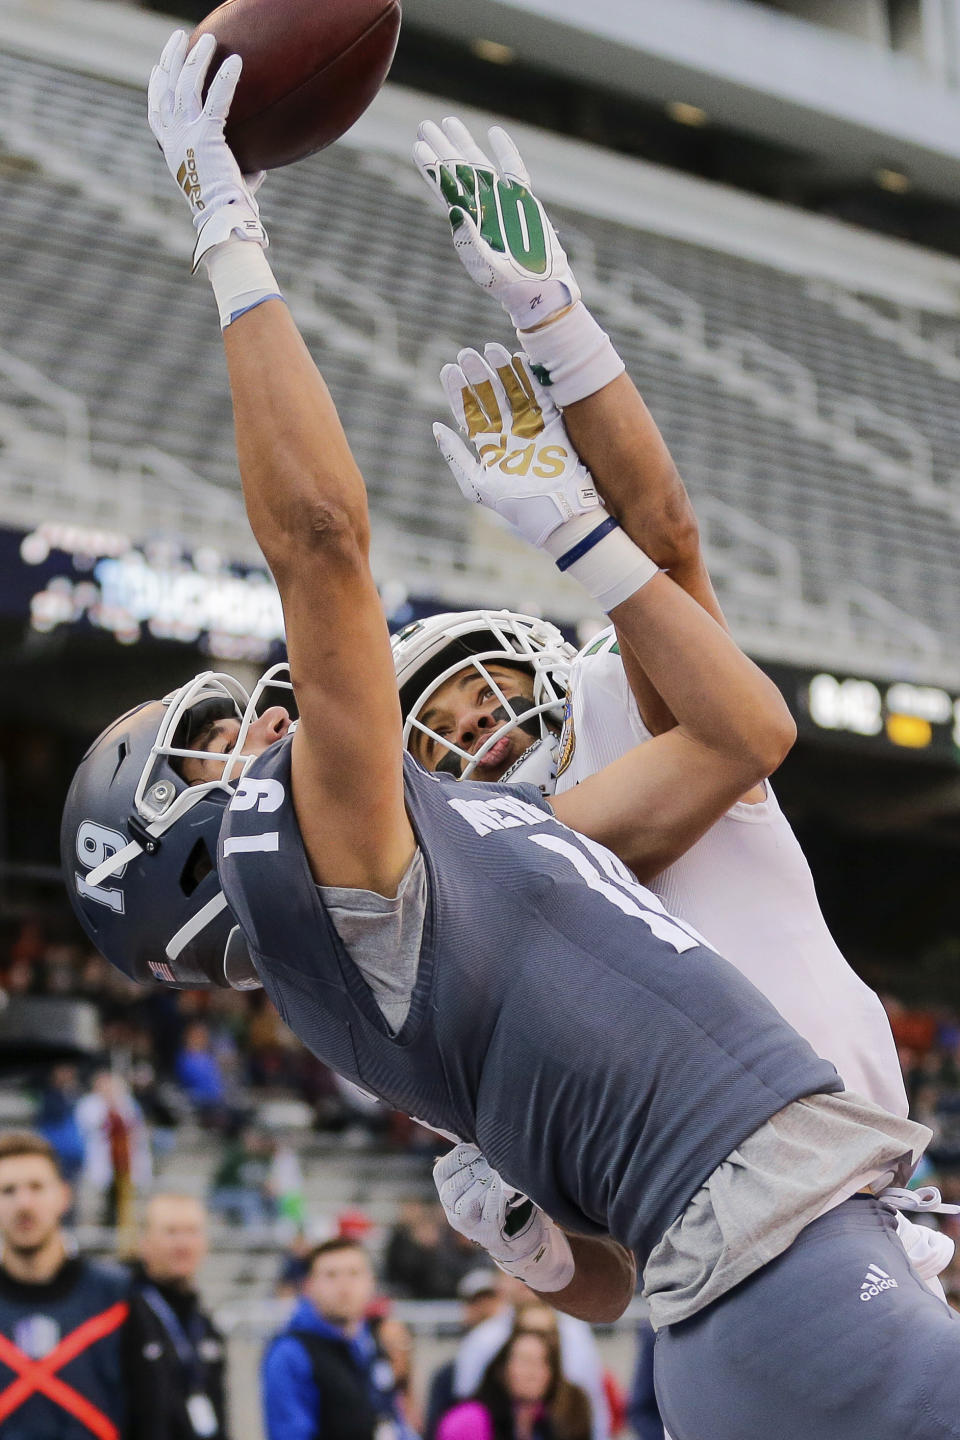 Ohio cornerback Marlin Brooks, right, tries to knock the ball away from Nevada wide receiver Cole Turner (19) on a two-point conversion try late in the second half of the Famous Idaho Potato Bowl NCAA college football game, Friday, Jan. 3, 2020, in Boise, Idaho. (AP Photo/Steve Conner)